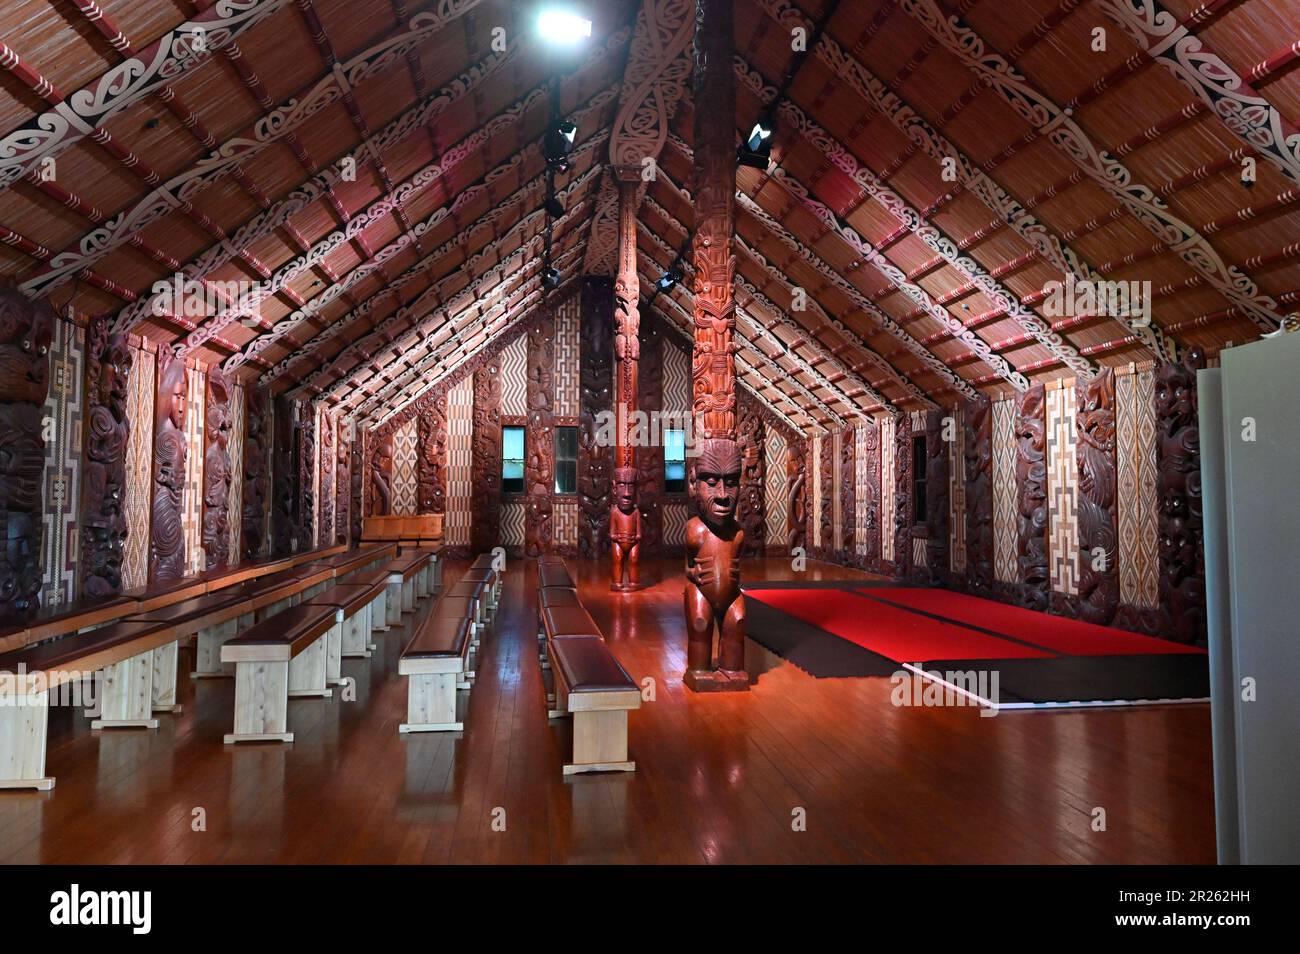 The ceremonial house at Waitangi is called the Whare Rūnanga. It is a significant structure located within the Waitangi Treaty Grounds in New Zealand. The Whare Rūnanga serves as a symbol of partnership and unity between Māori and the British Crown.  The Whare Rūnanga is a traditional Māori meeting house built in the style of a carved wharenui (large house). It was constructed in 1940 to commemorate the centenary of the signing of the Treaty of Waitangi Stock Photo